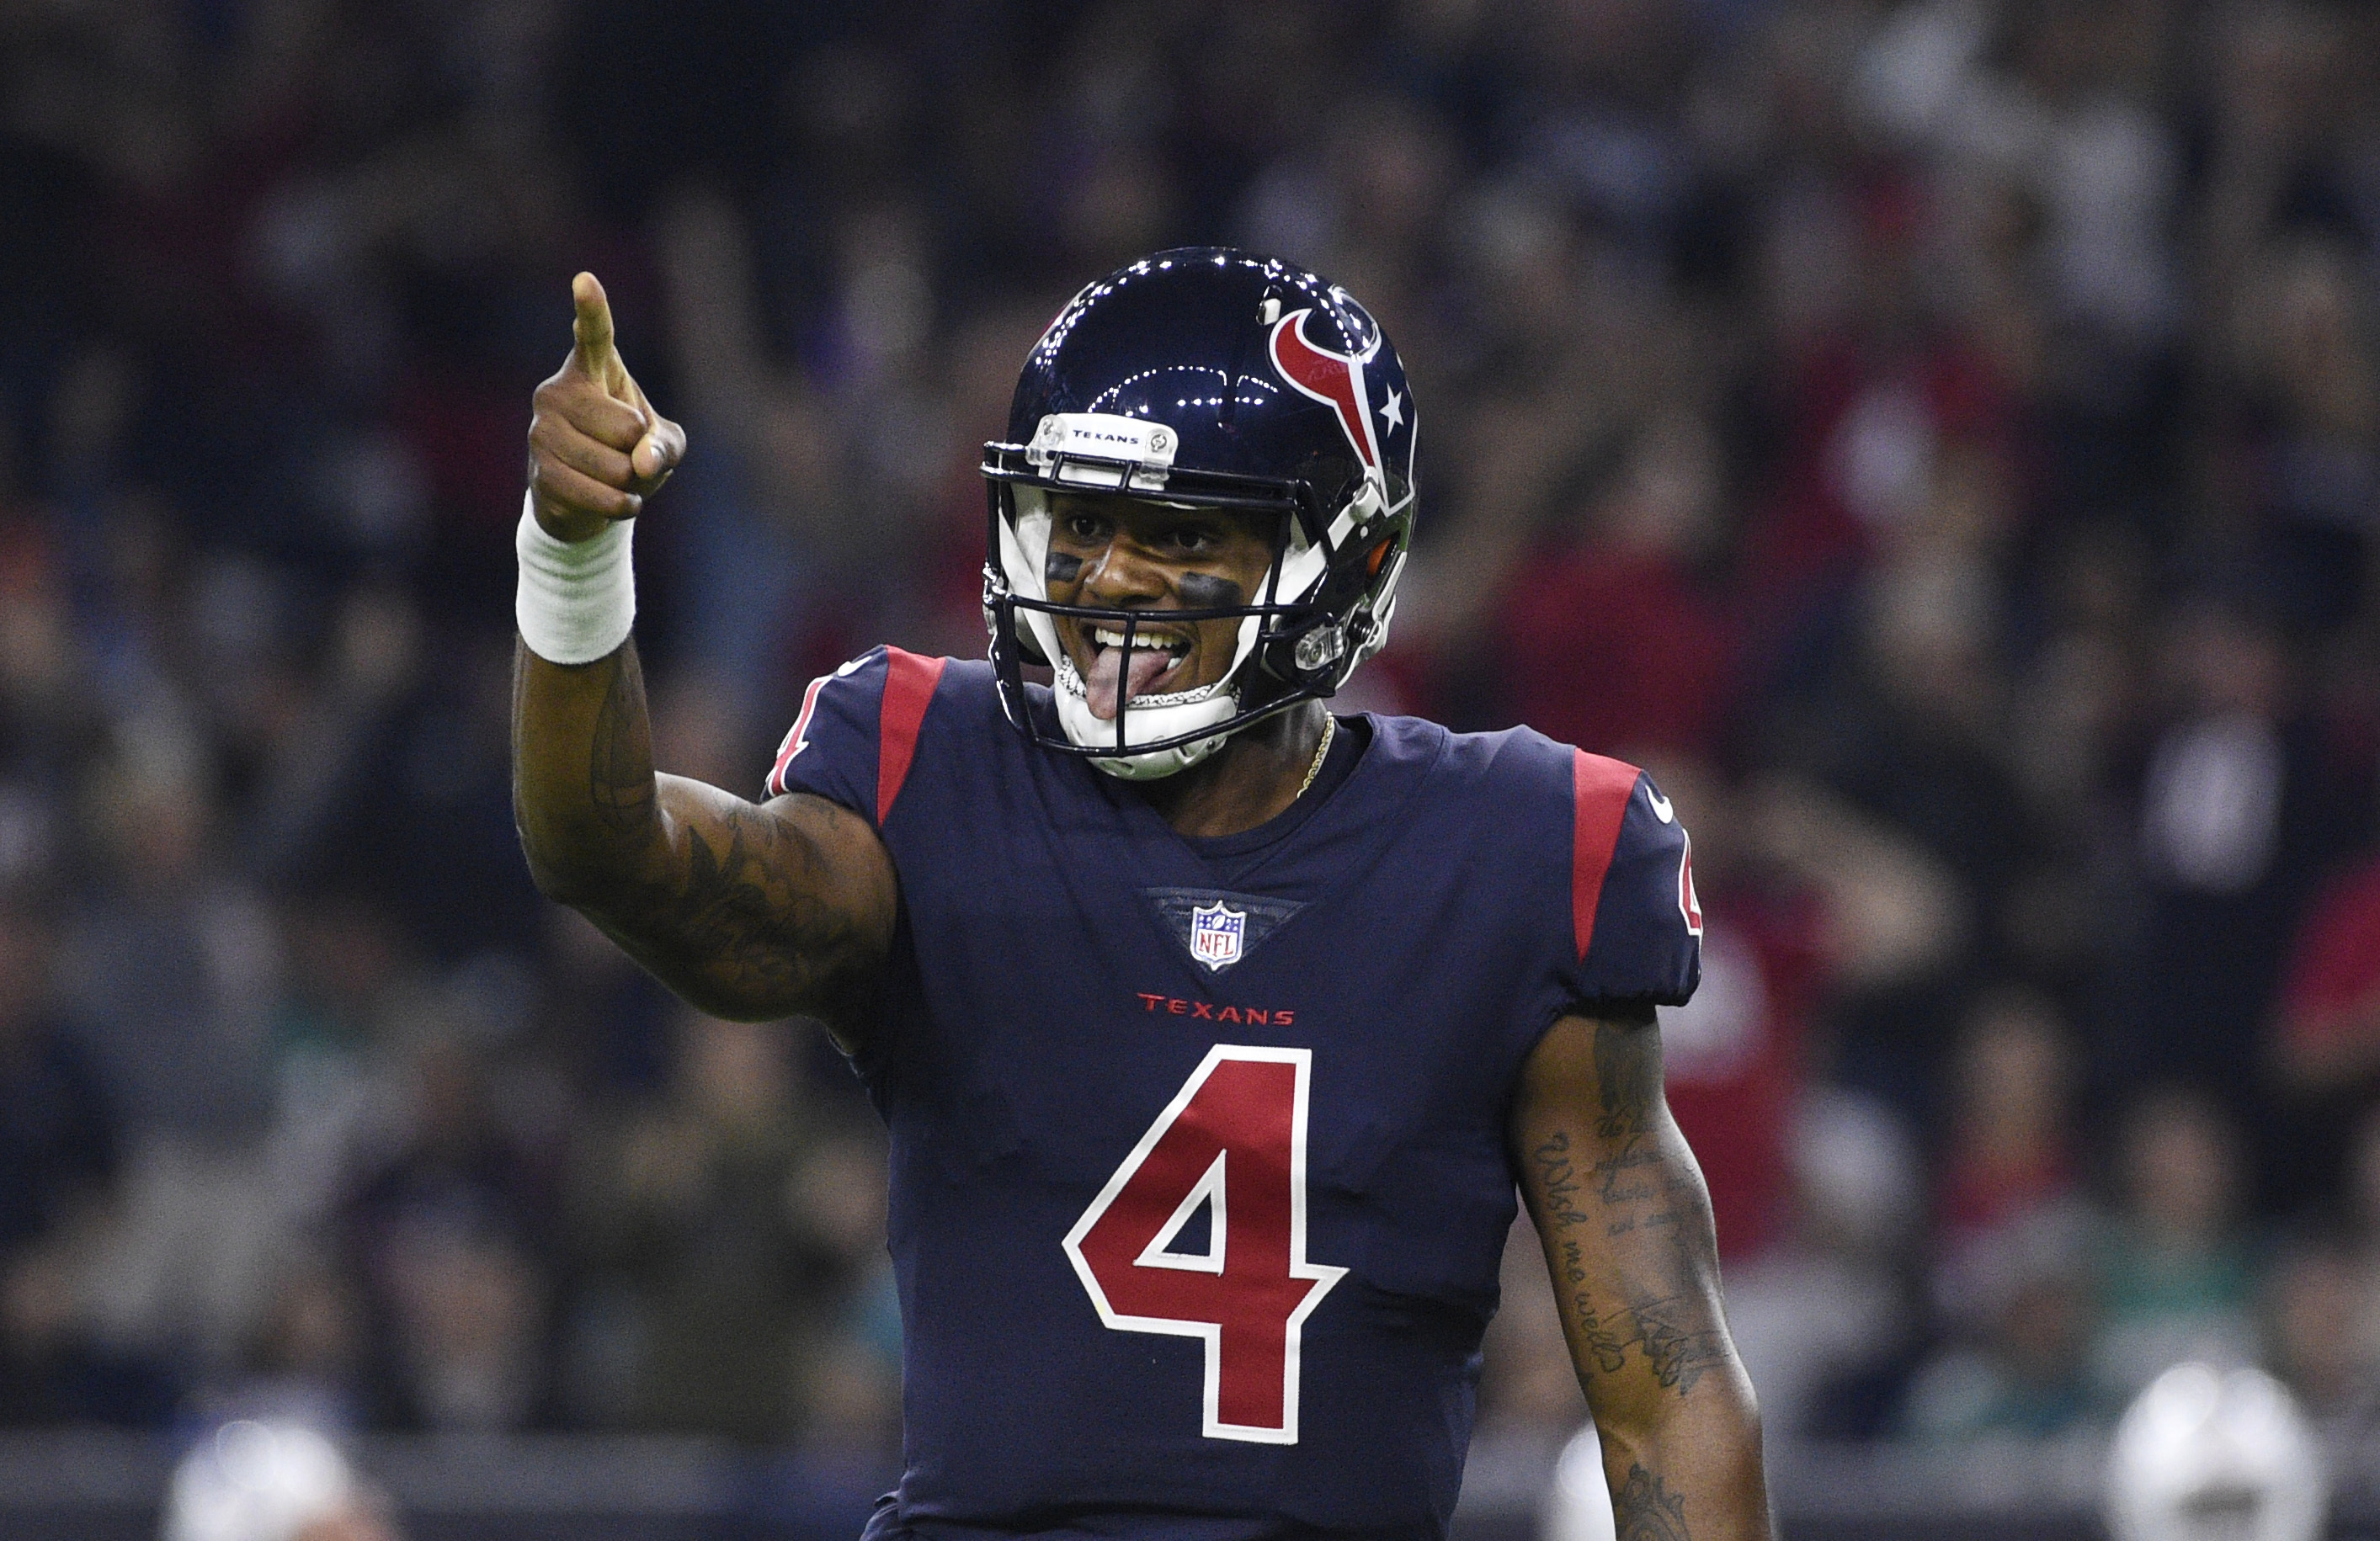 Yes...the Houston Texans could finish atop the whole AFC